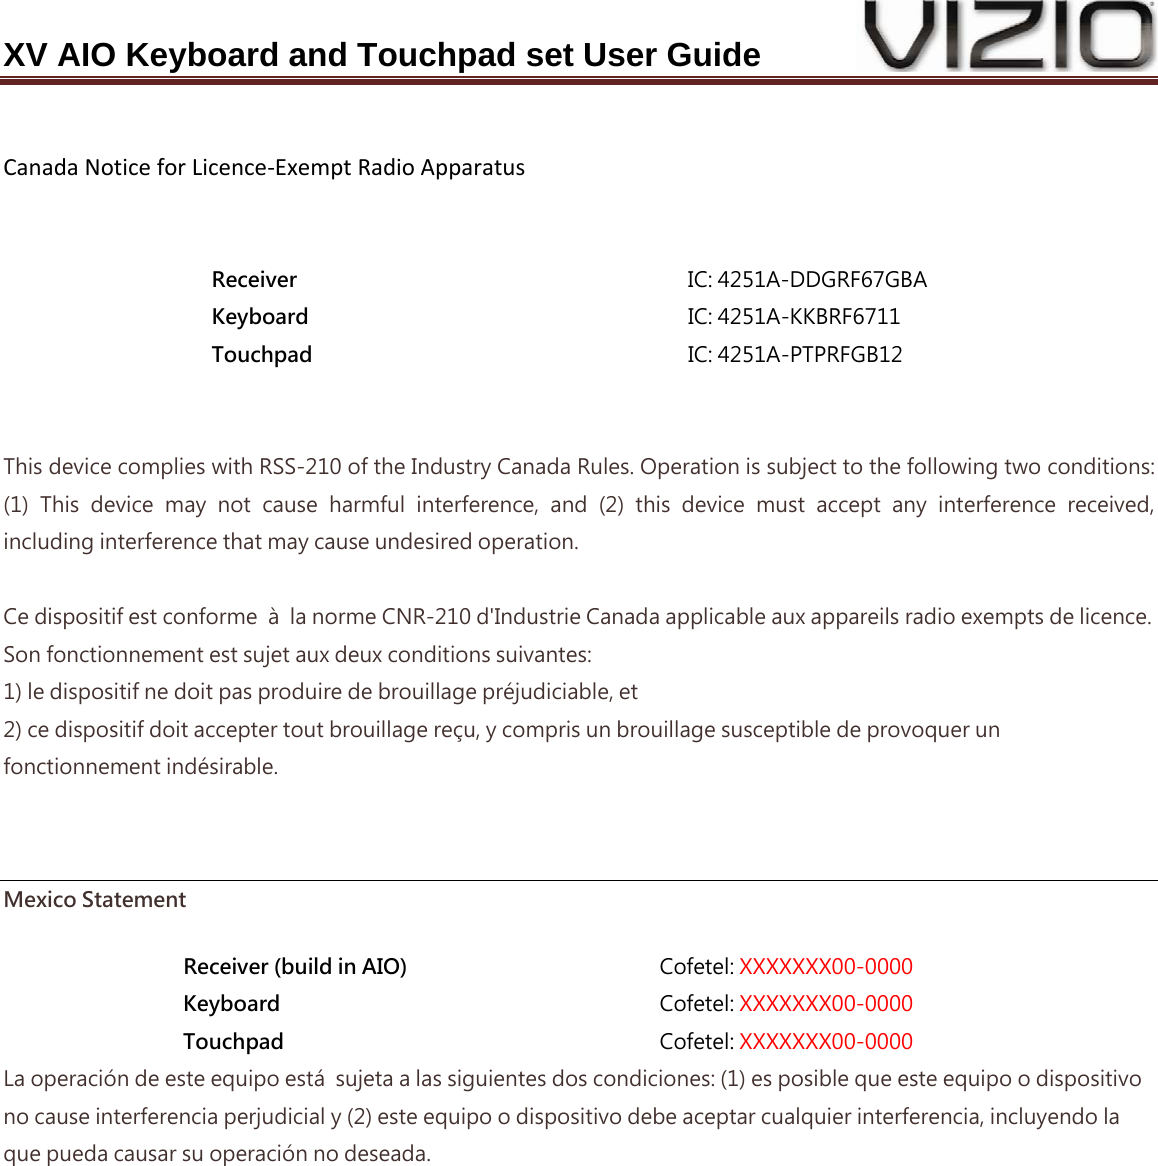 XV AIO Keyboard and Touchpad set User Guide  CanadaNoticeforLicence‐ExemptRadioApparatus  Receiver  IC: 4251A-DDGRF67GBA Keyboard  IC: 4251A-KKBRF6711 Touchpad  IC: 4251A-PTPRFGB12  This device complies with RSS-210 of the Industry Canada Rules. Operation is subject to the following two conditions: (1)  This  device  may  not  cause  harmful  interference,  and  (2)  this device must accept any interference received, including interference that may cause undesired operation.  Ce dispositif est conforme  à  la norme CNR-210 d&apos;Industrie Canada applicable aux appareils radio exempts de licence. Son fonctionnement est sujet aux deux conditions suivantes: 1) le dispositif ne doit pas produire de brouillage préjudiciable, et 2) ce dispositif doit accepter tout brouillage reçu, y compris un brouillage susceptible de provoquer un fonctionnement indésirable.   Mexico Statement Receiver (build in AIO)  Cofetel: XXXXXXX00-0000 Keyboard  Cofetel: XXXXXXX00-0000 Touchpad  Cofetel: XXXXXXX00-0000 La operación de este equipo está  sujeta a las siguientes dos condiciones: (1) es posible que este equipo o dispositivo no cause interferencia perjudicial y (2) este equipo o dispositivo debe aceptar cualquier interferencia, incluyendo la que pueda causar su operación no deseada. 